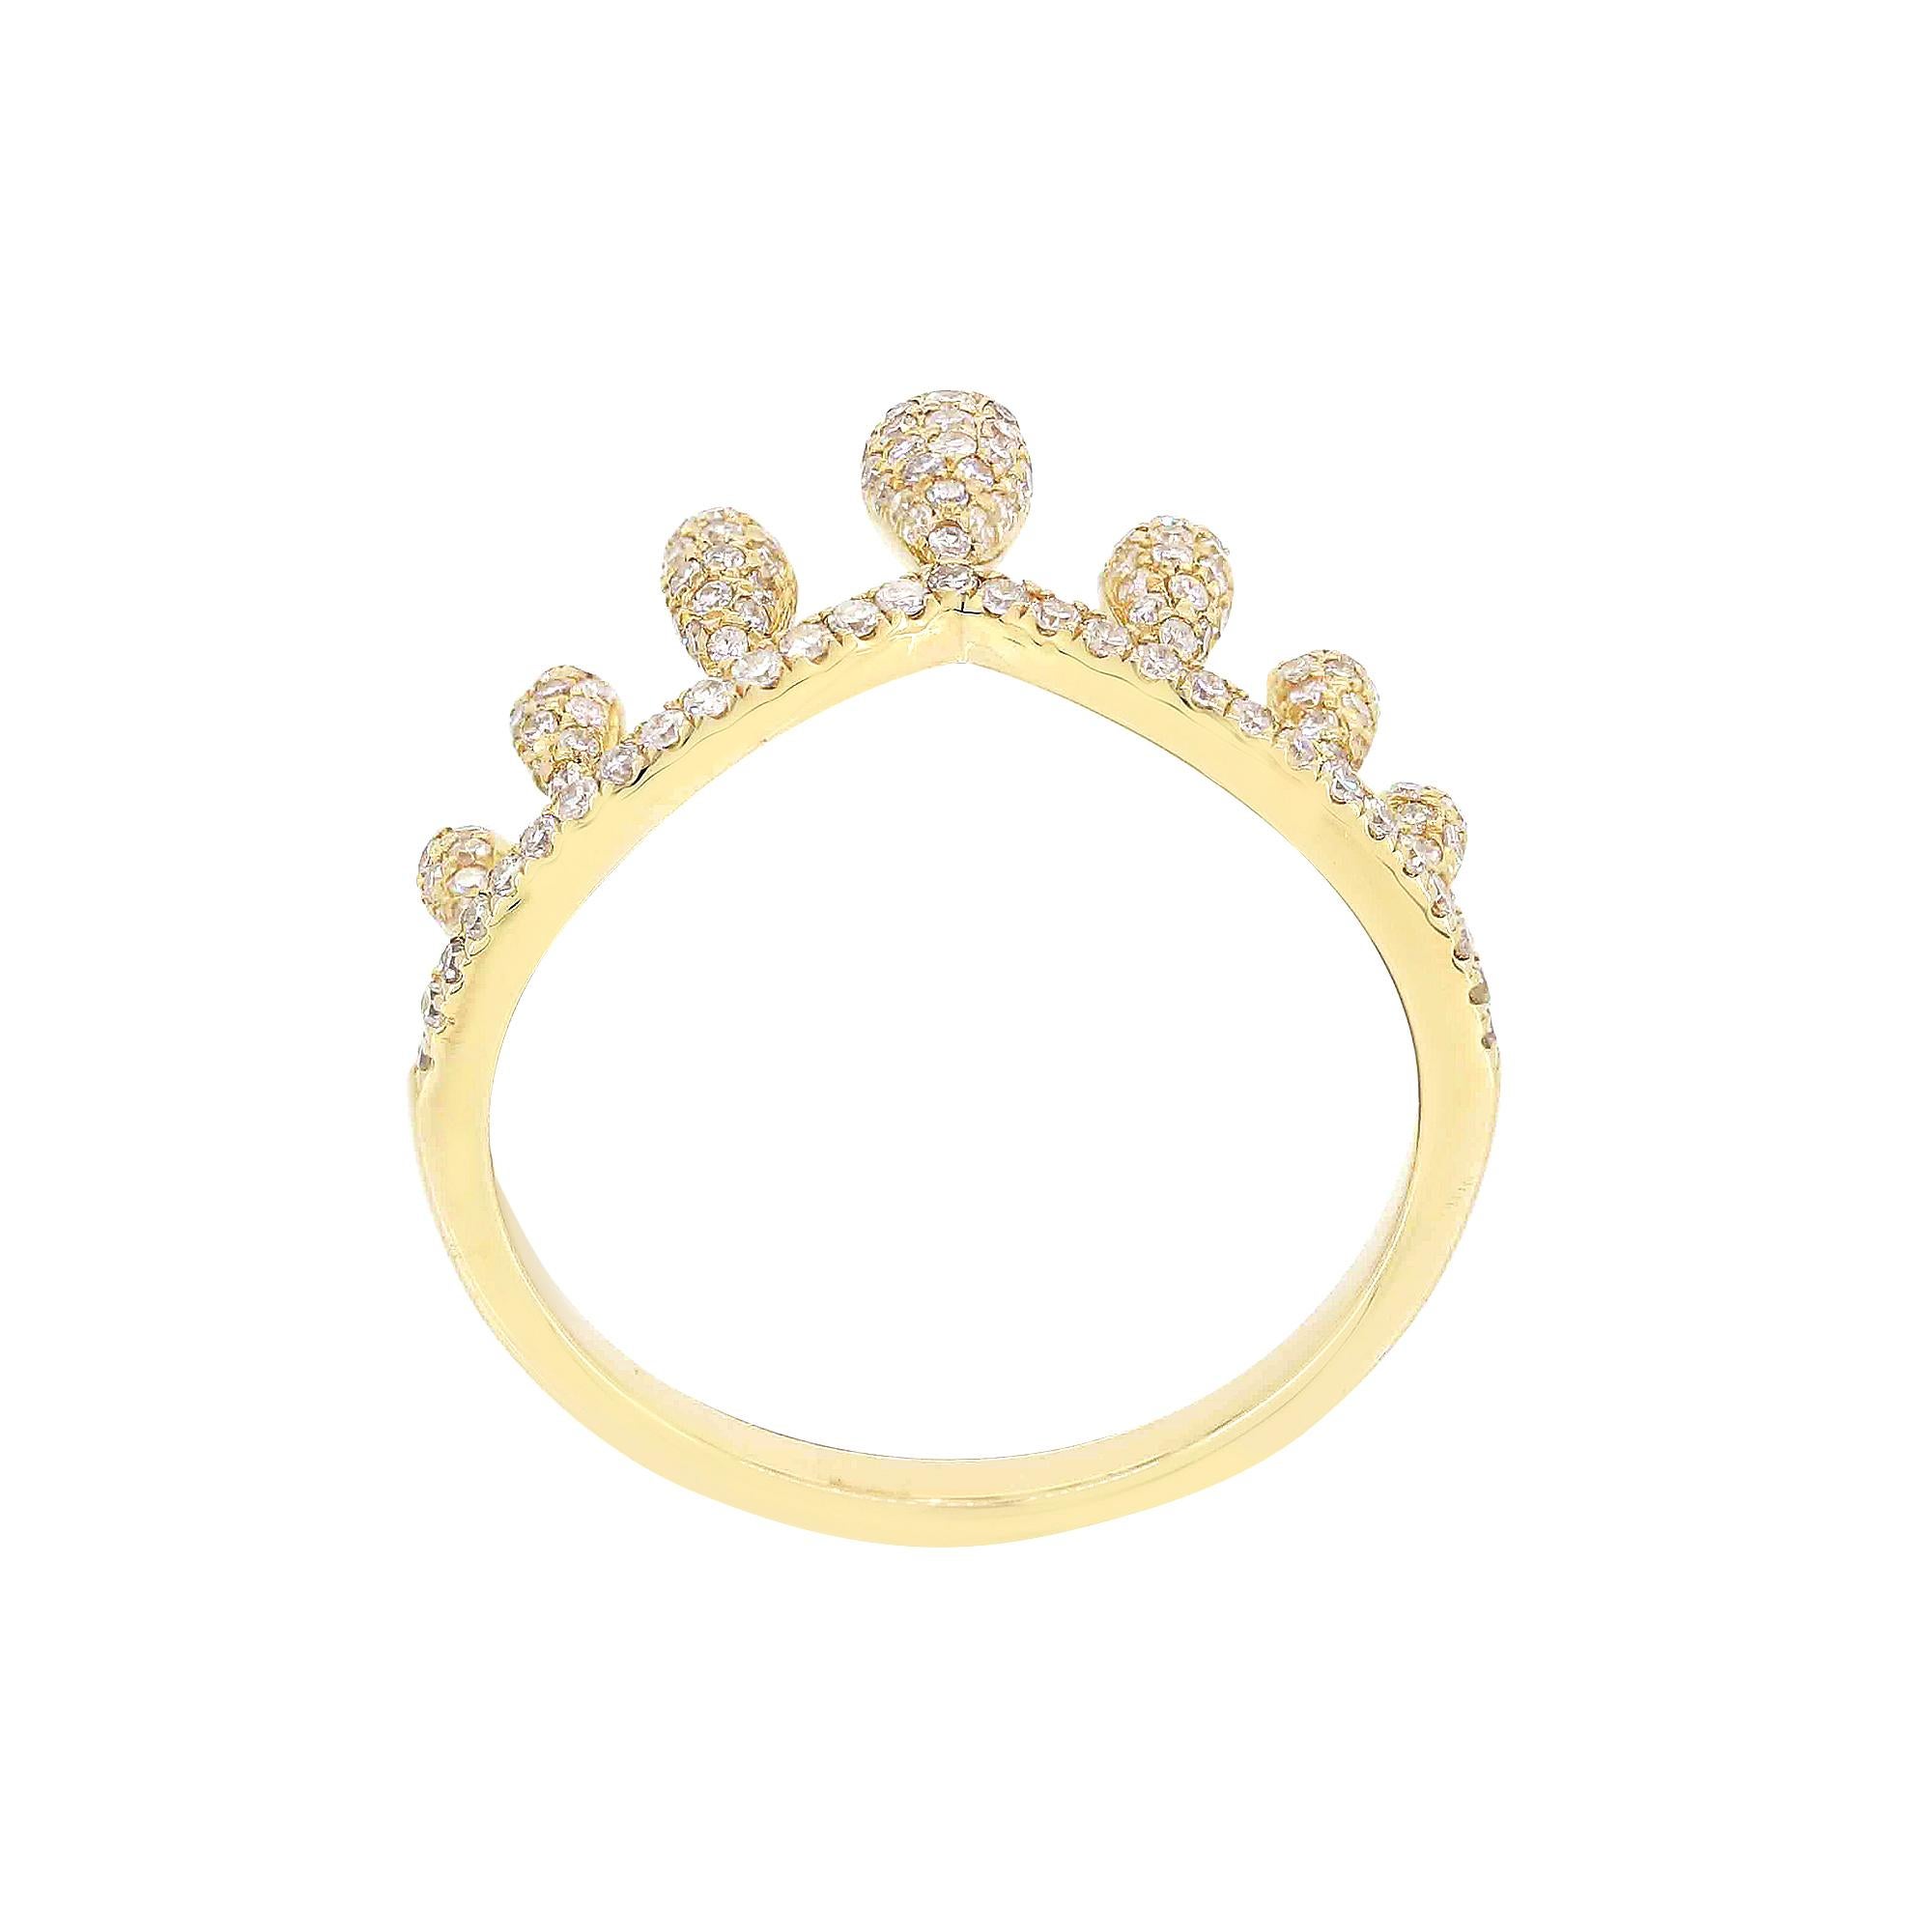 This Luxle stunning crown ring is featured with round cut diamonds set in pear shaped motifs graduating on both ends. Each ring is made with 145 round diamonds in micro pave setting.

Please follow the Luxury Jewels storefront to view the latest